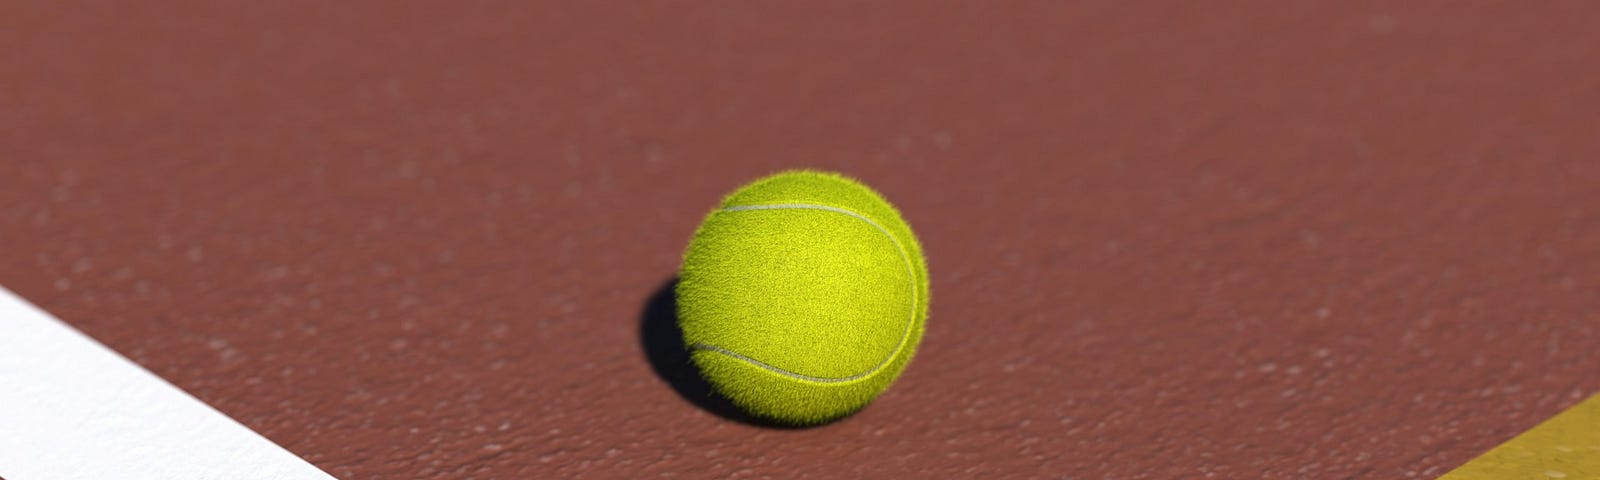 tennis ball on the court near the line